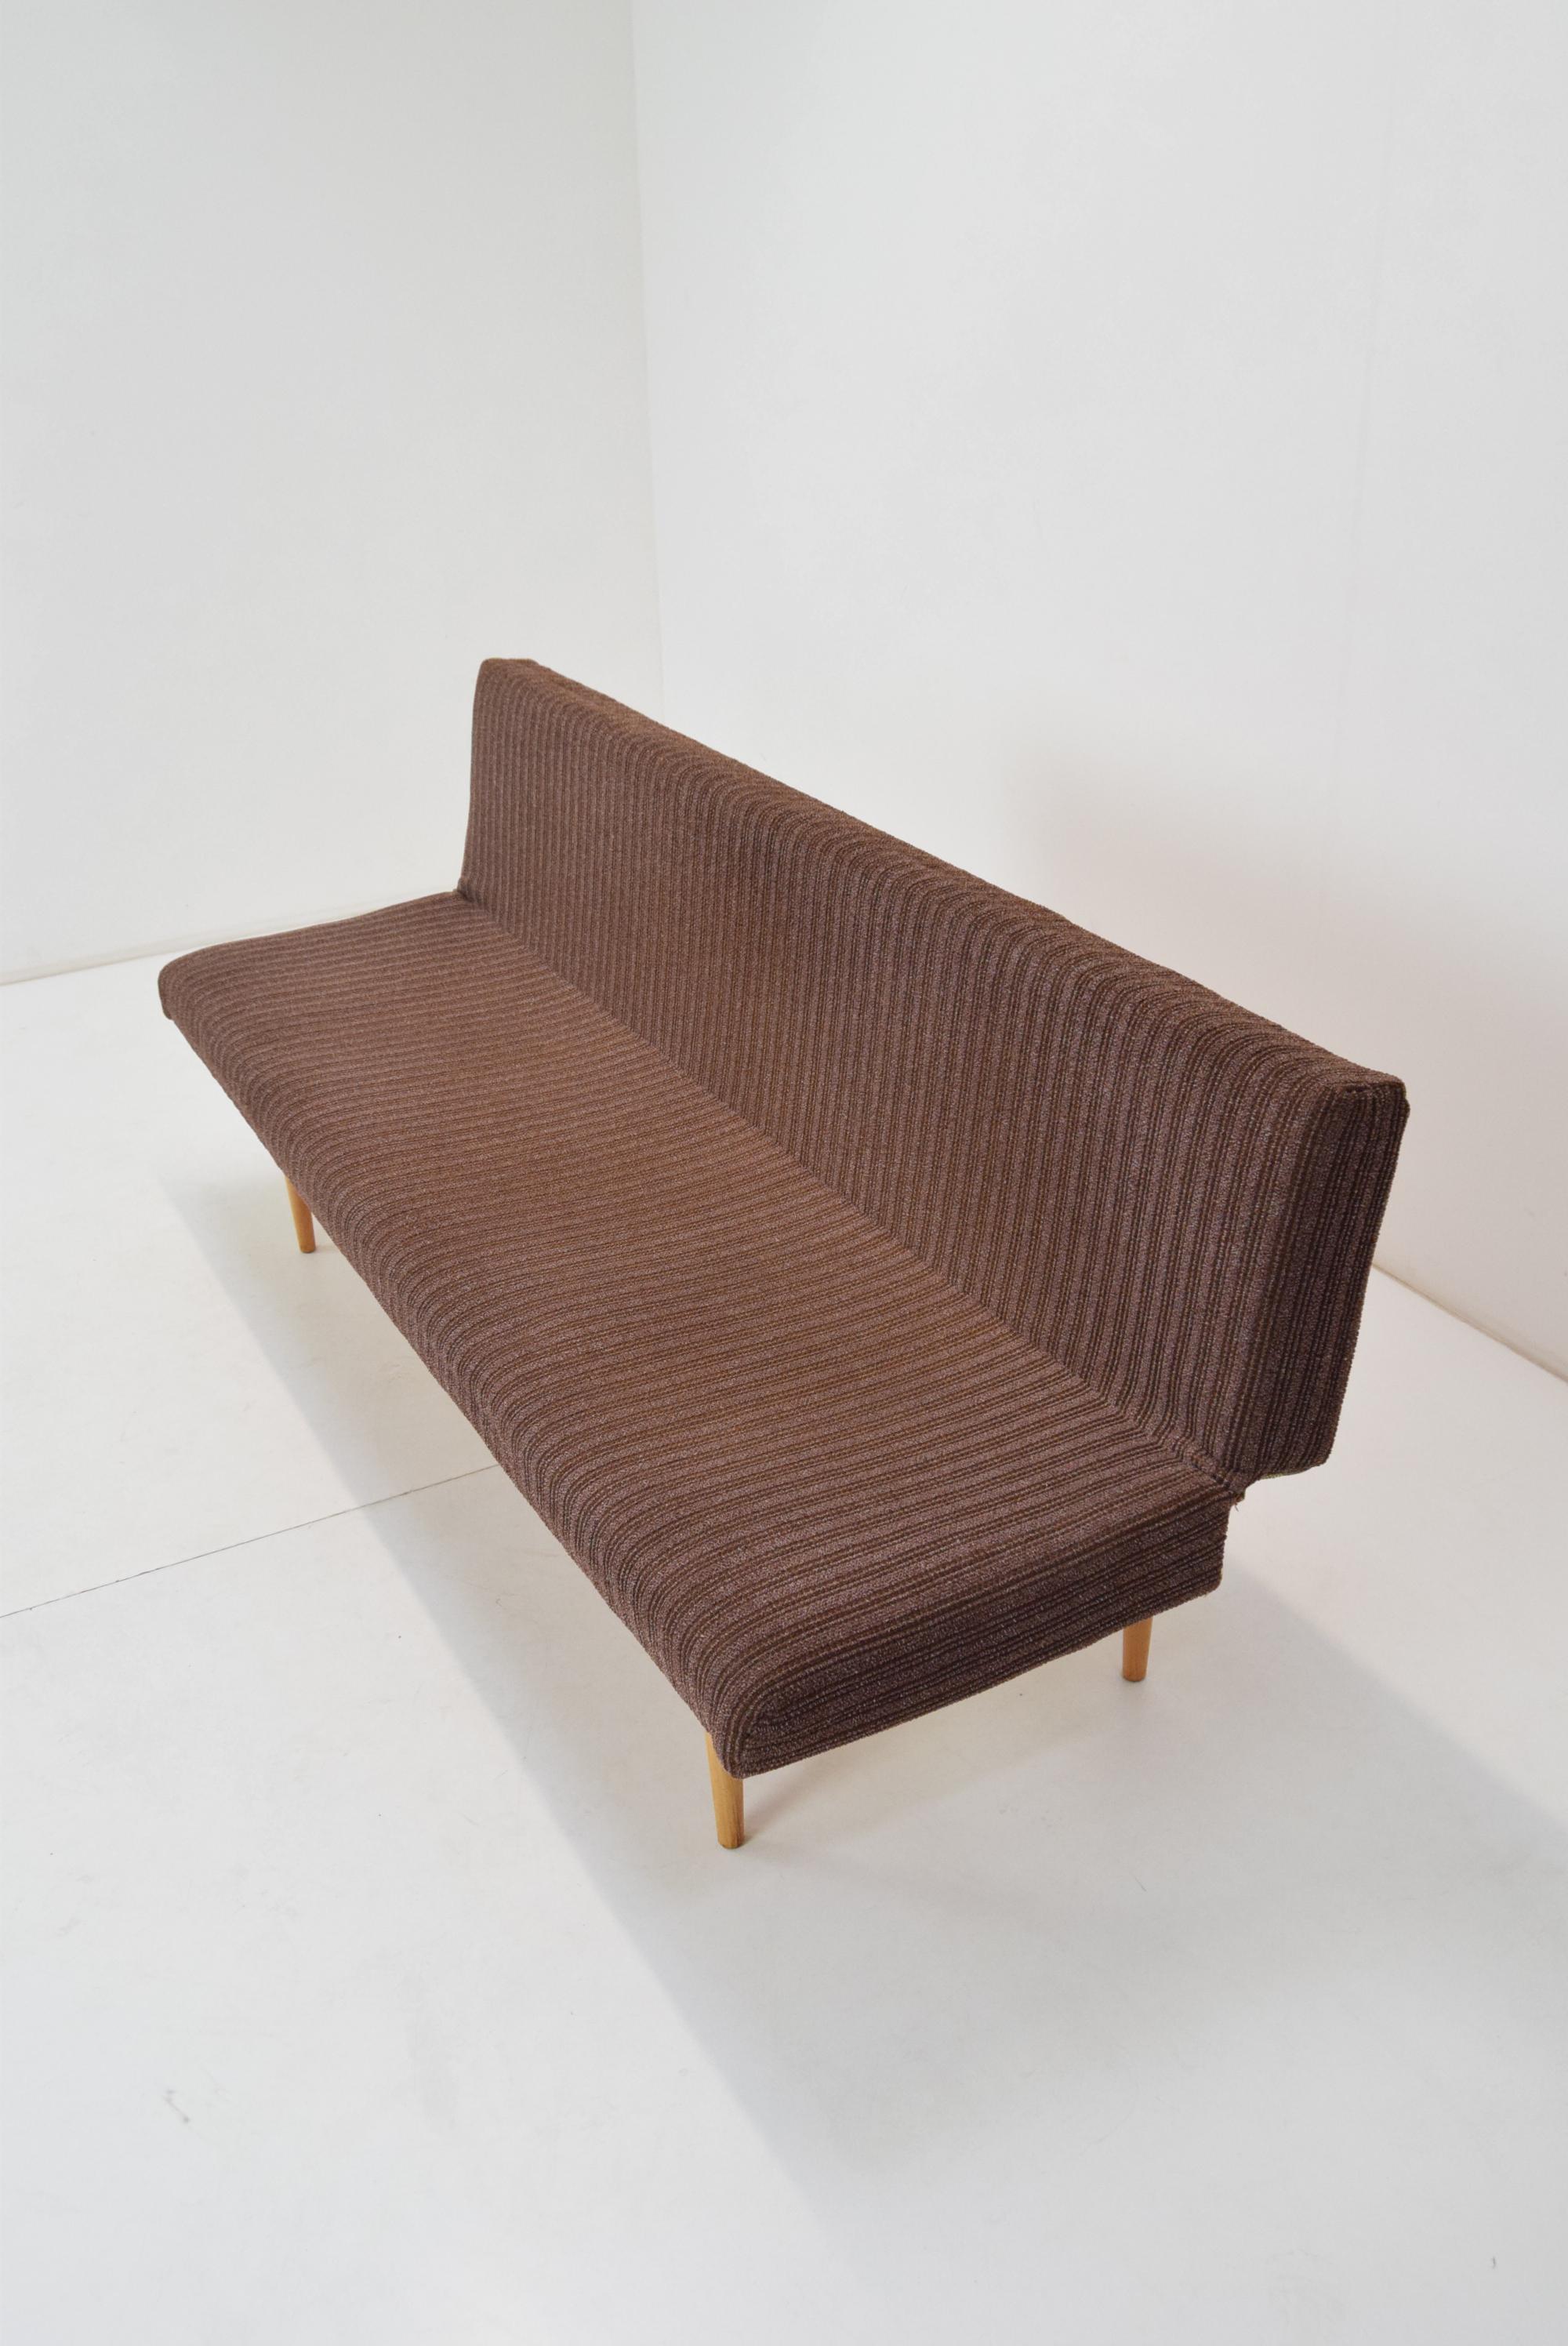 Czech Mid-Century Sofa or Daybed Designed by Miroslav Navrátil, 1960's For Sale